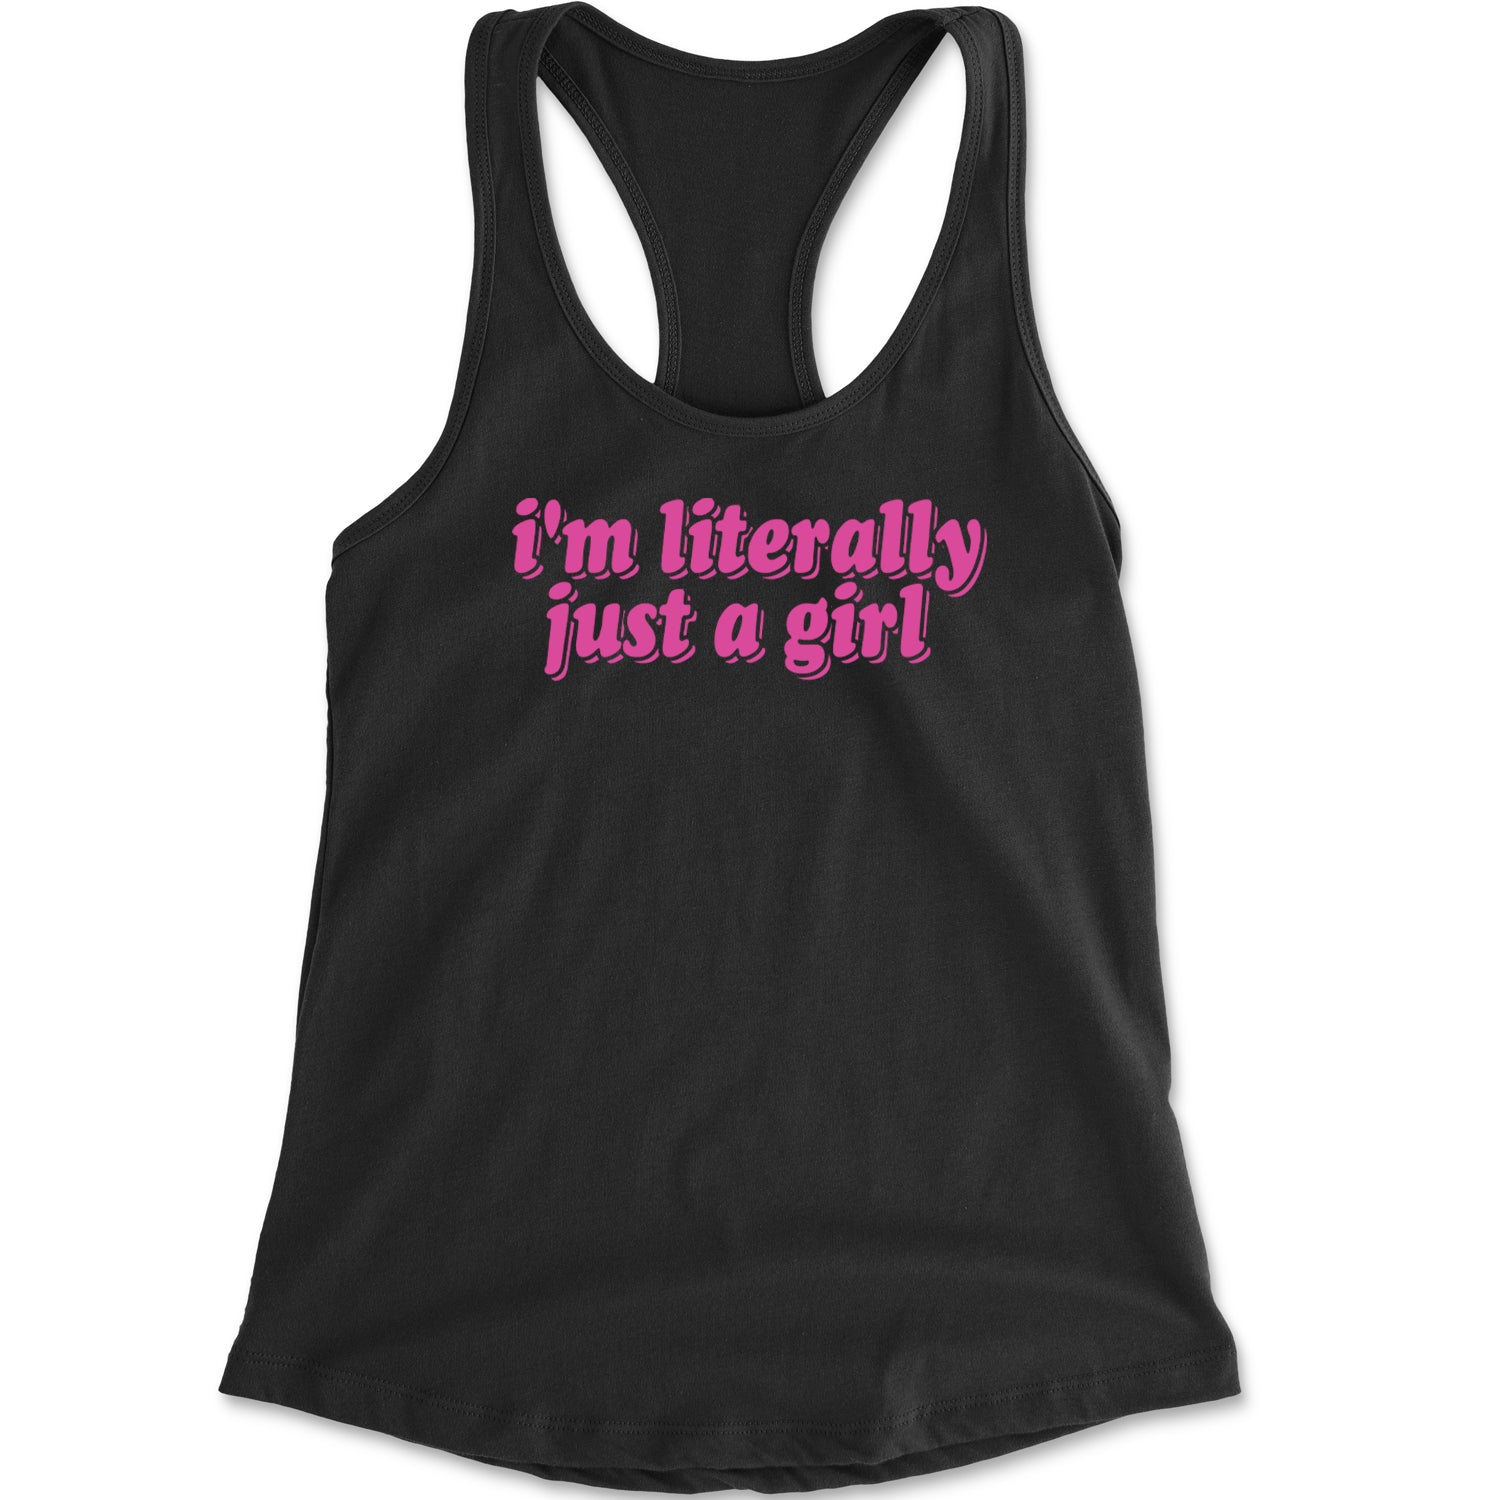 I'm Literally Just A Girl Racerback Tank Top for Women